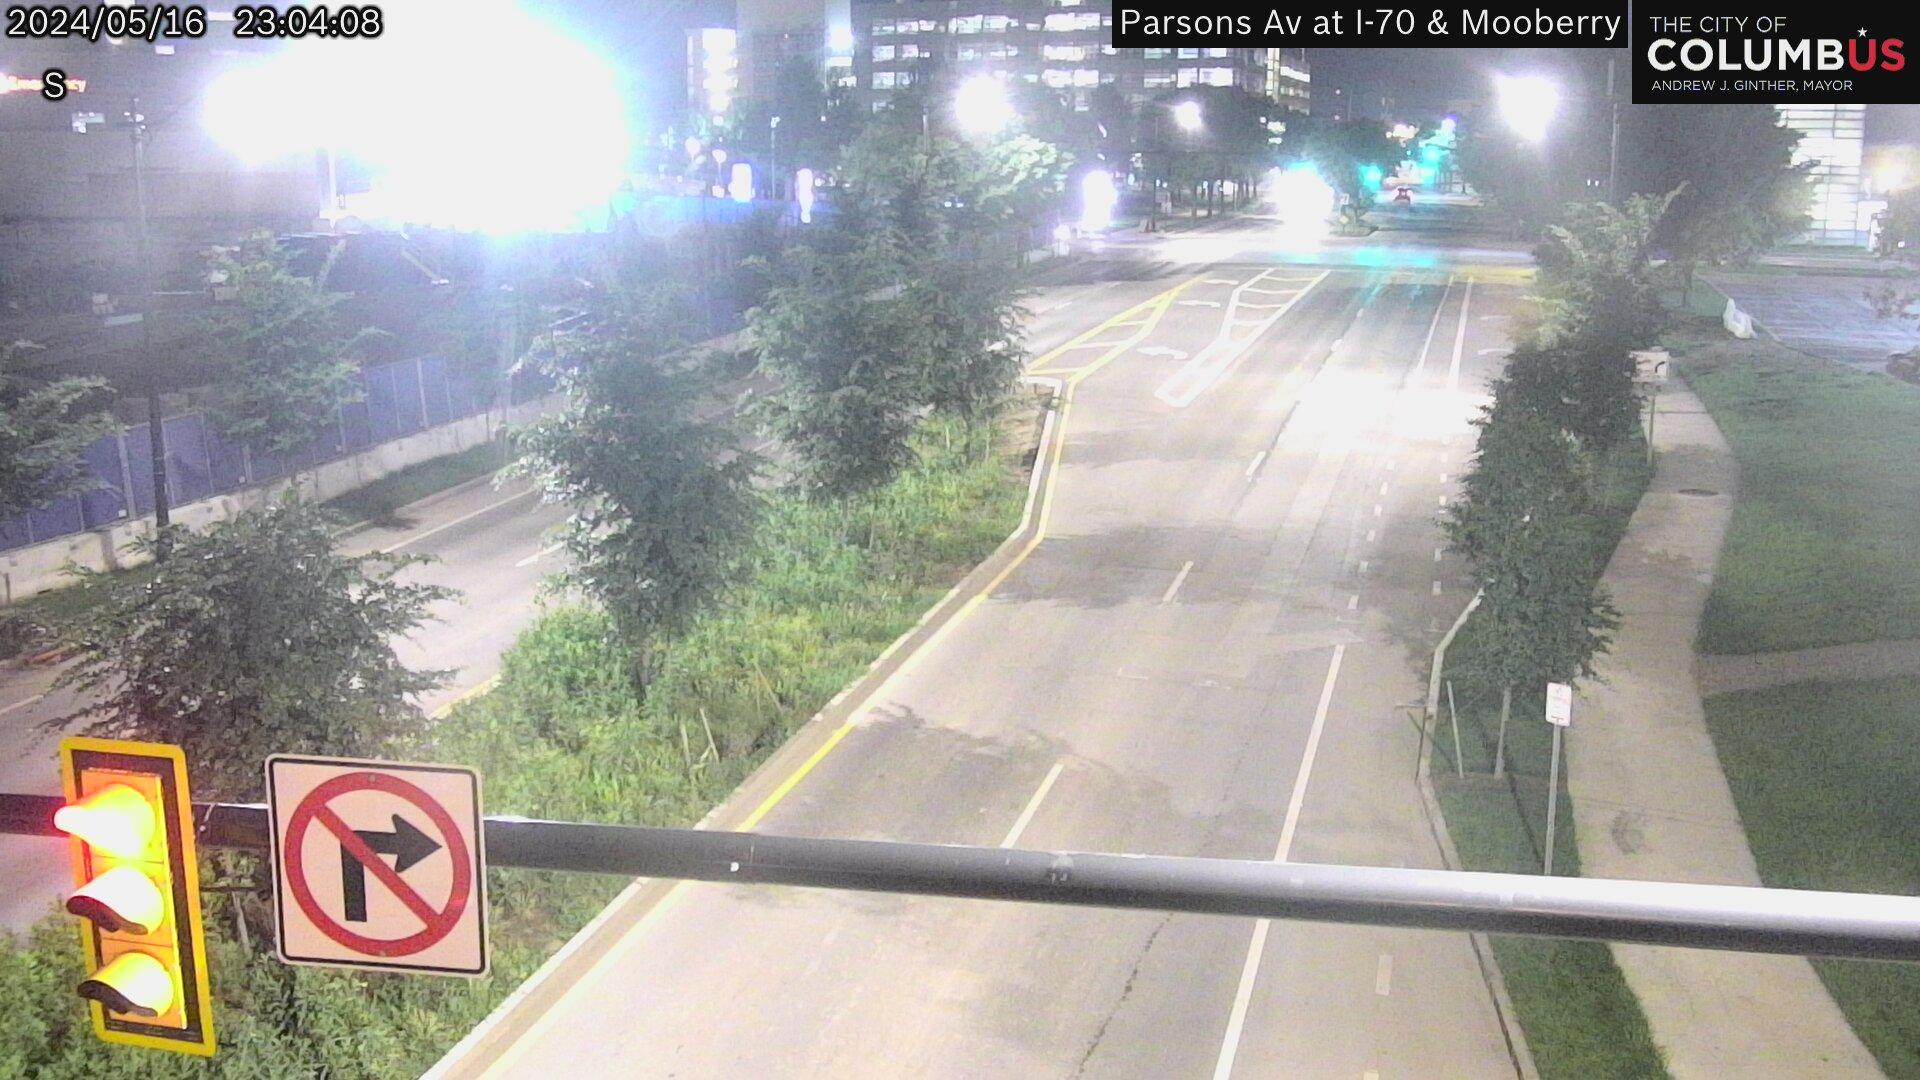 Traffic Cam Livingston Park: City of Columbus) I-70 EB Off Ramp & Mooberry St at Parsons Ave Player